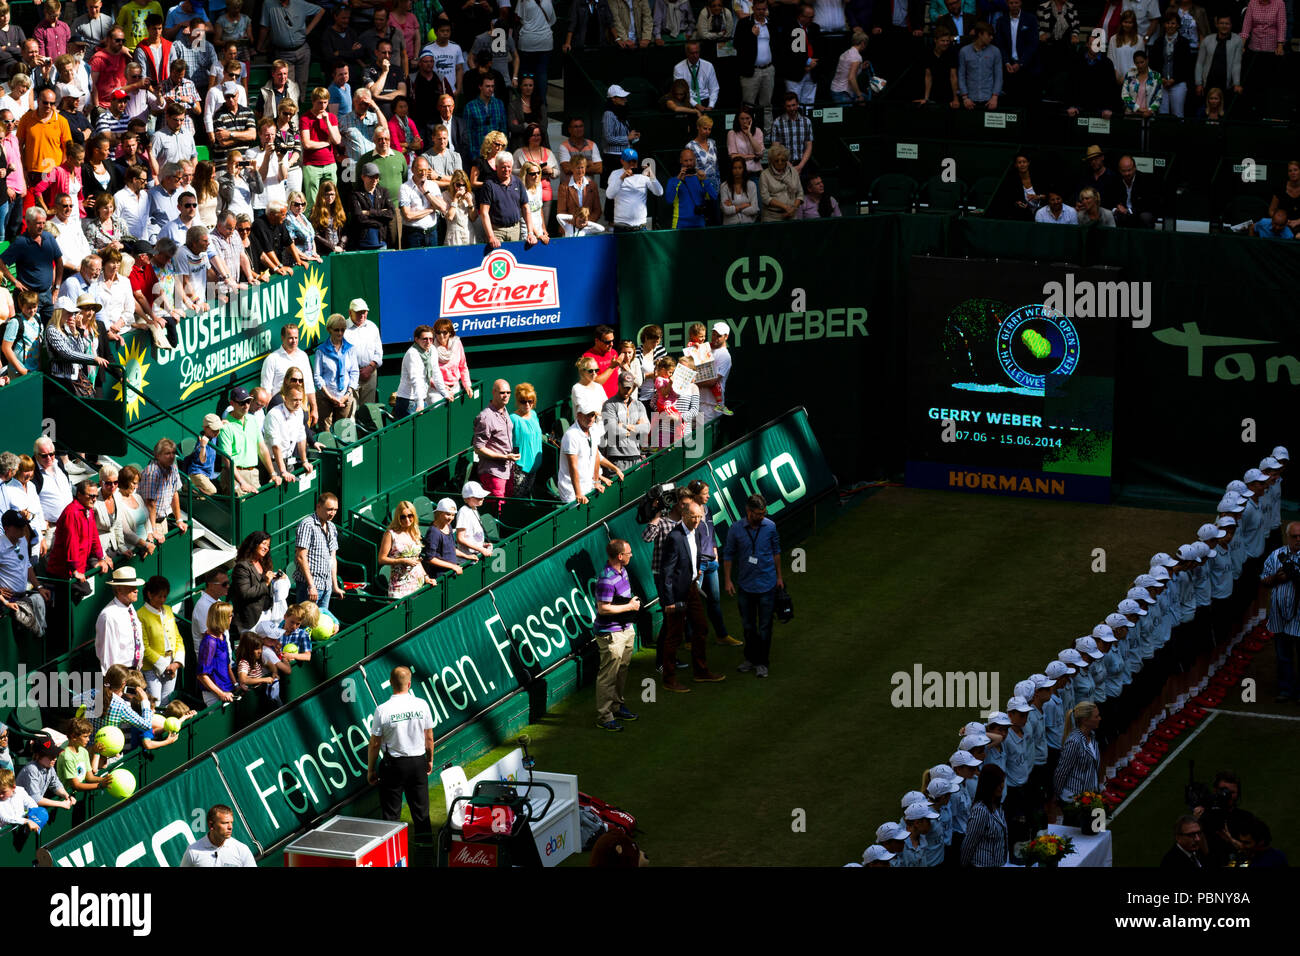 Roger Federer's box after the final of the 2013 Gerry Weber Open in Halle (Westfalen), Germany. Stock Photo